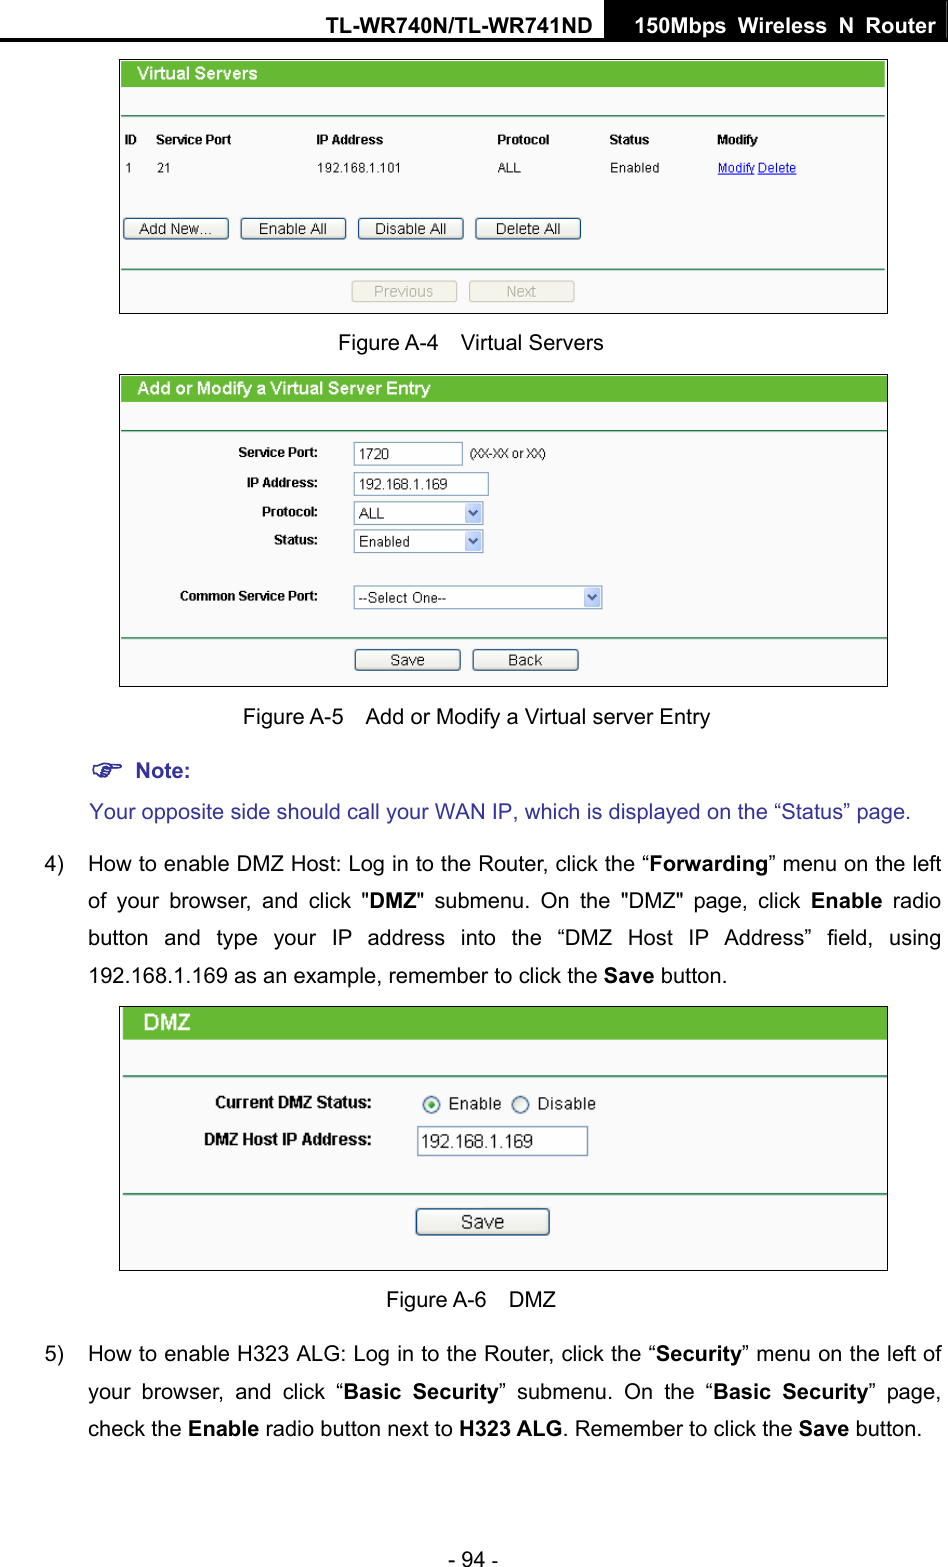 TL-WR740N/TL-WR741ND 150Mbps Wireless N Router - 94 -  Figure A-4  Virtual Servers    Figure A-5    Add or Modify a Virtual server Entry ) Note: Your opposite side should call your WAN IP, which is displayed on the “Status” page. 4)  How to enable DMZ Host: Log in to the Router, click the “Forwarding” menu on the left of your browser, and click &quot;DMZ&quot; submenu. On the &quot;DMZ&quot; page, click Enable radio button and type your IP address into the “DMZ Host IP Address” field, using 192.168.1.169 as an example, remember to click the Save button.    Figure A-6  DMZ 5)  How to enable H323 ALG: Log in to the Router, click the “Security” menu on the left of your browser, and click “Basic Security” submenu. On the “Basic Security” page, check the Enable radio button next to H323 ALG. Remember to click the Save button. 